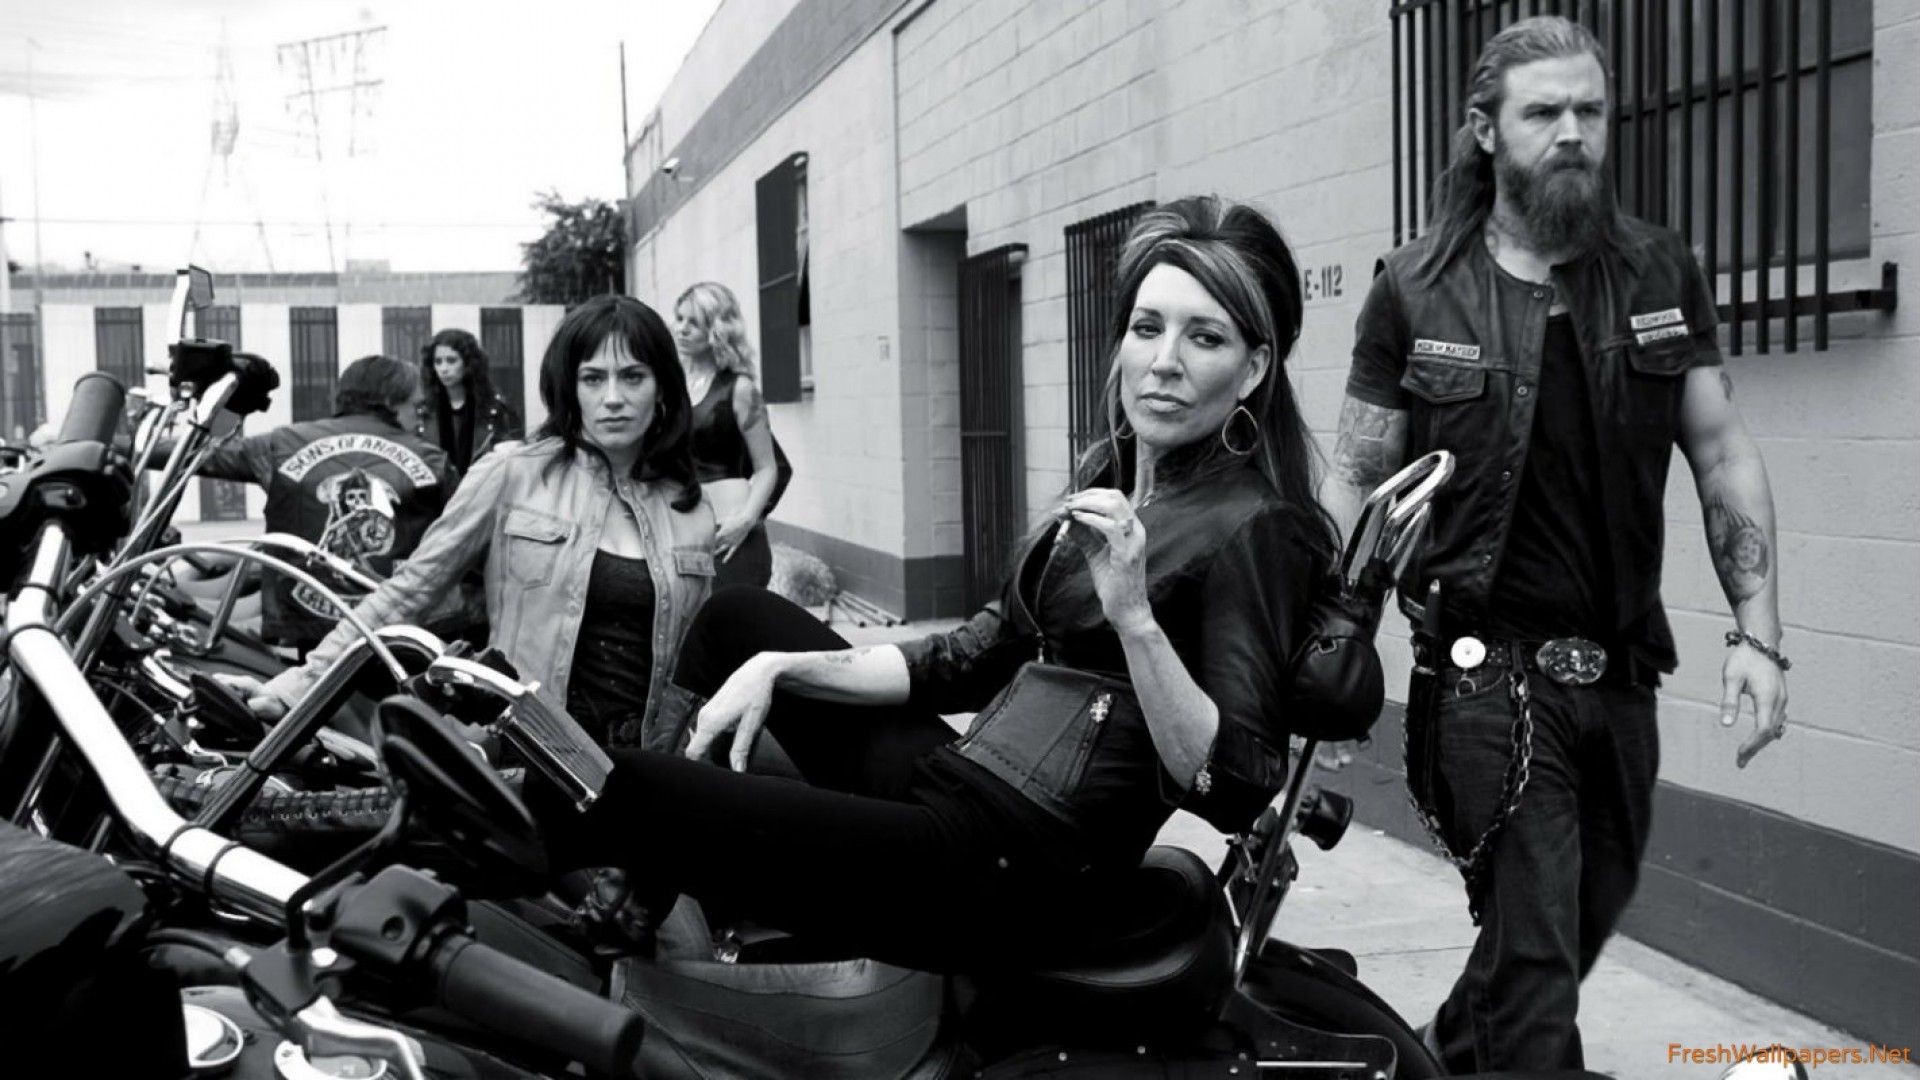 1920x1080 Sons of anarchy season 4 wallpapers